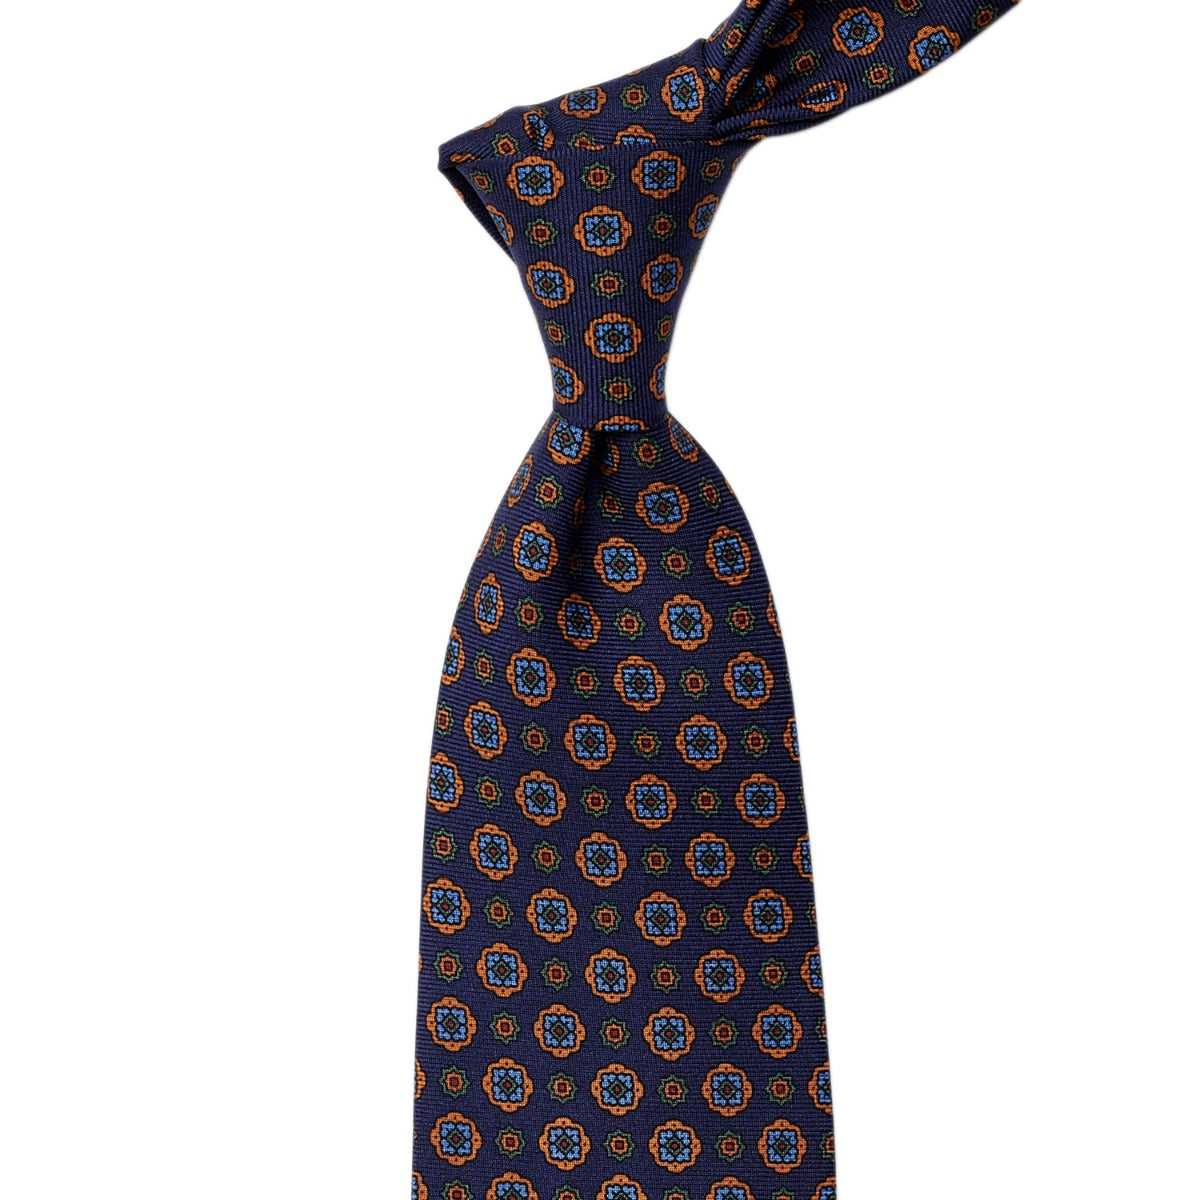 Handmade in the United Kingdom with quality craftsmanship, this KirbyAllison.com Sovereign Grade Navy Geometric Floral 36oz Printed Silk tie features an orange and blue pattern.